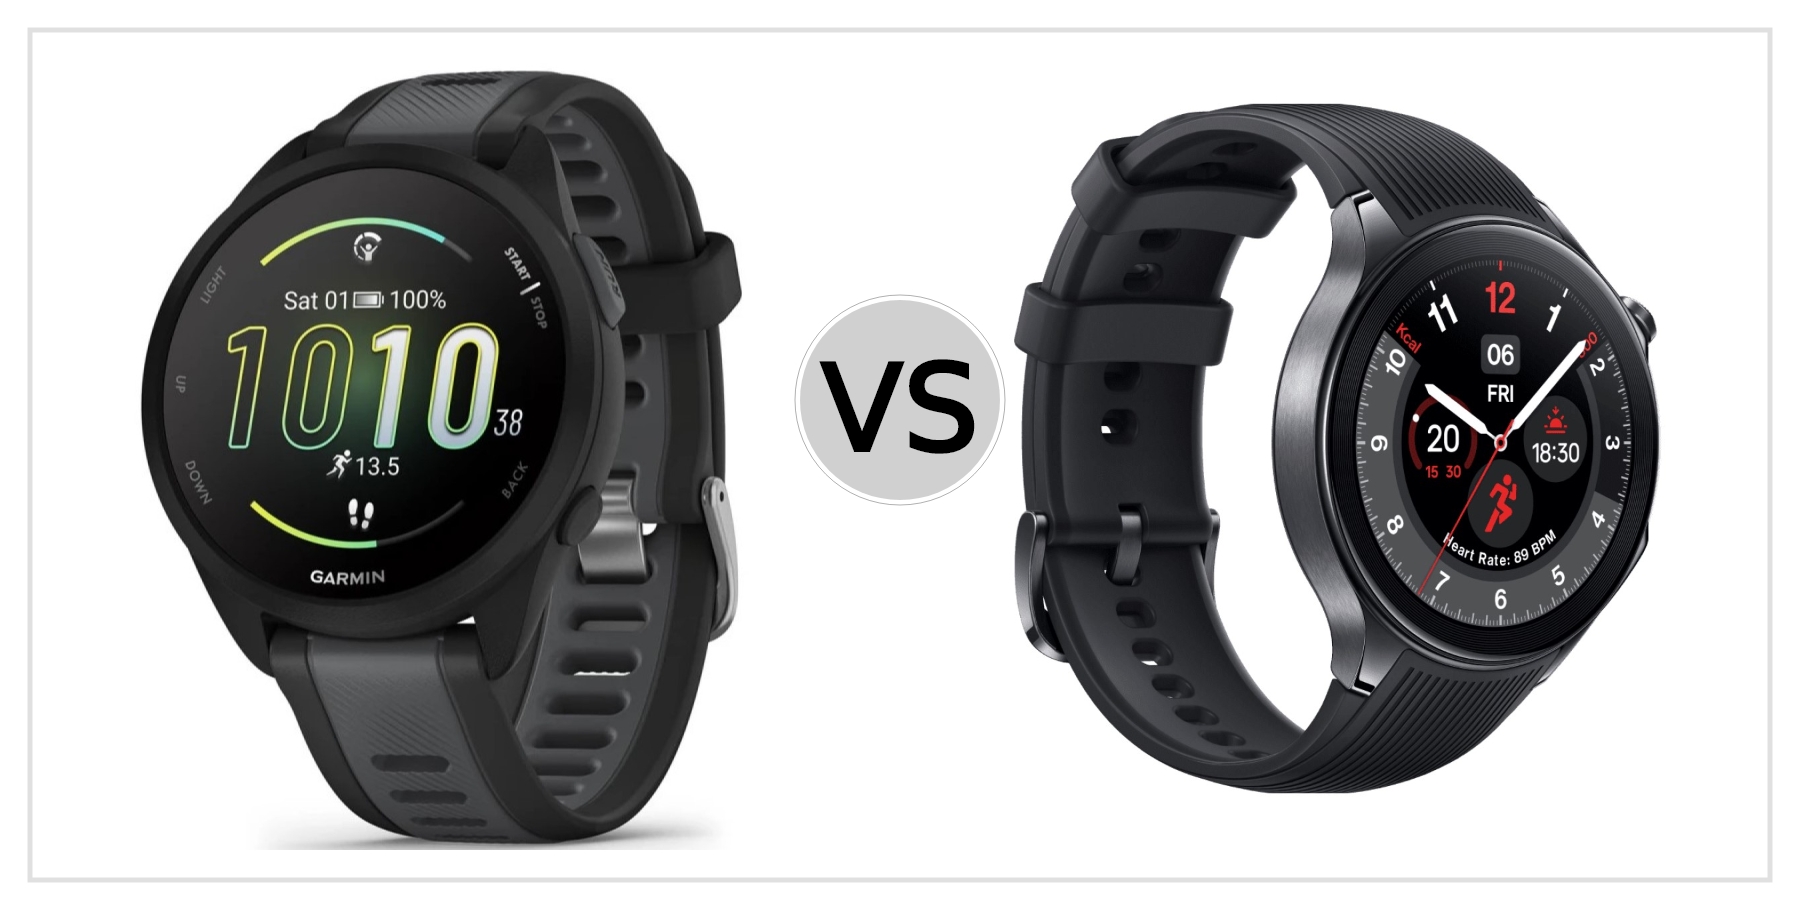 Compare Garmin Forerunner 165 Music VS OnePlus Watch 2 to see which is better